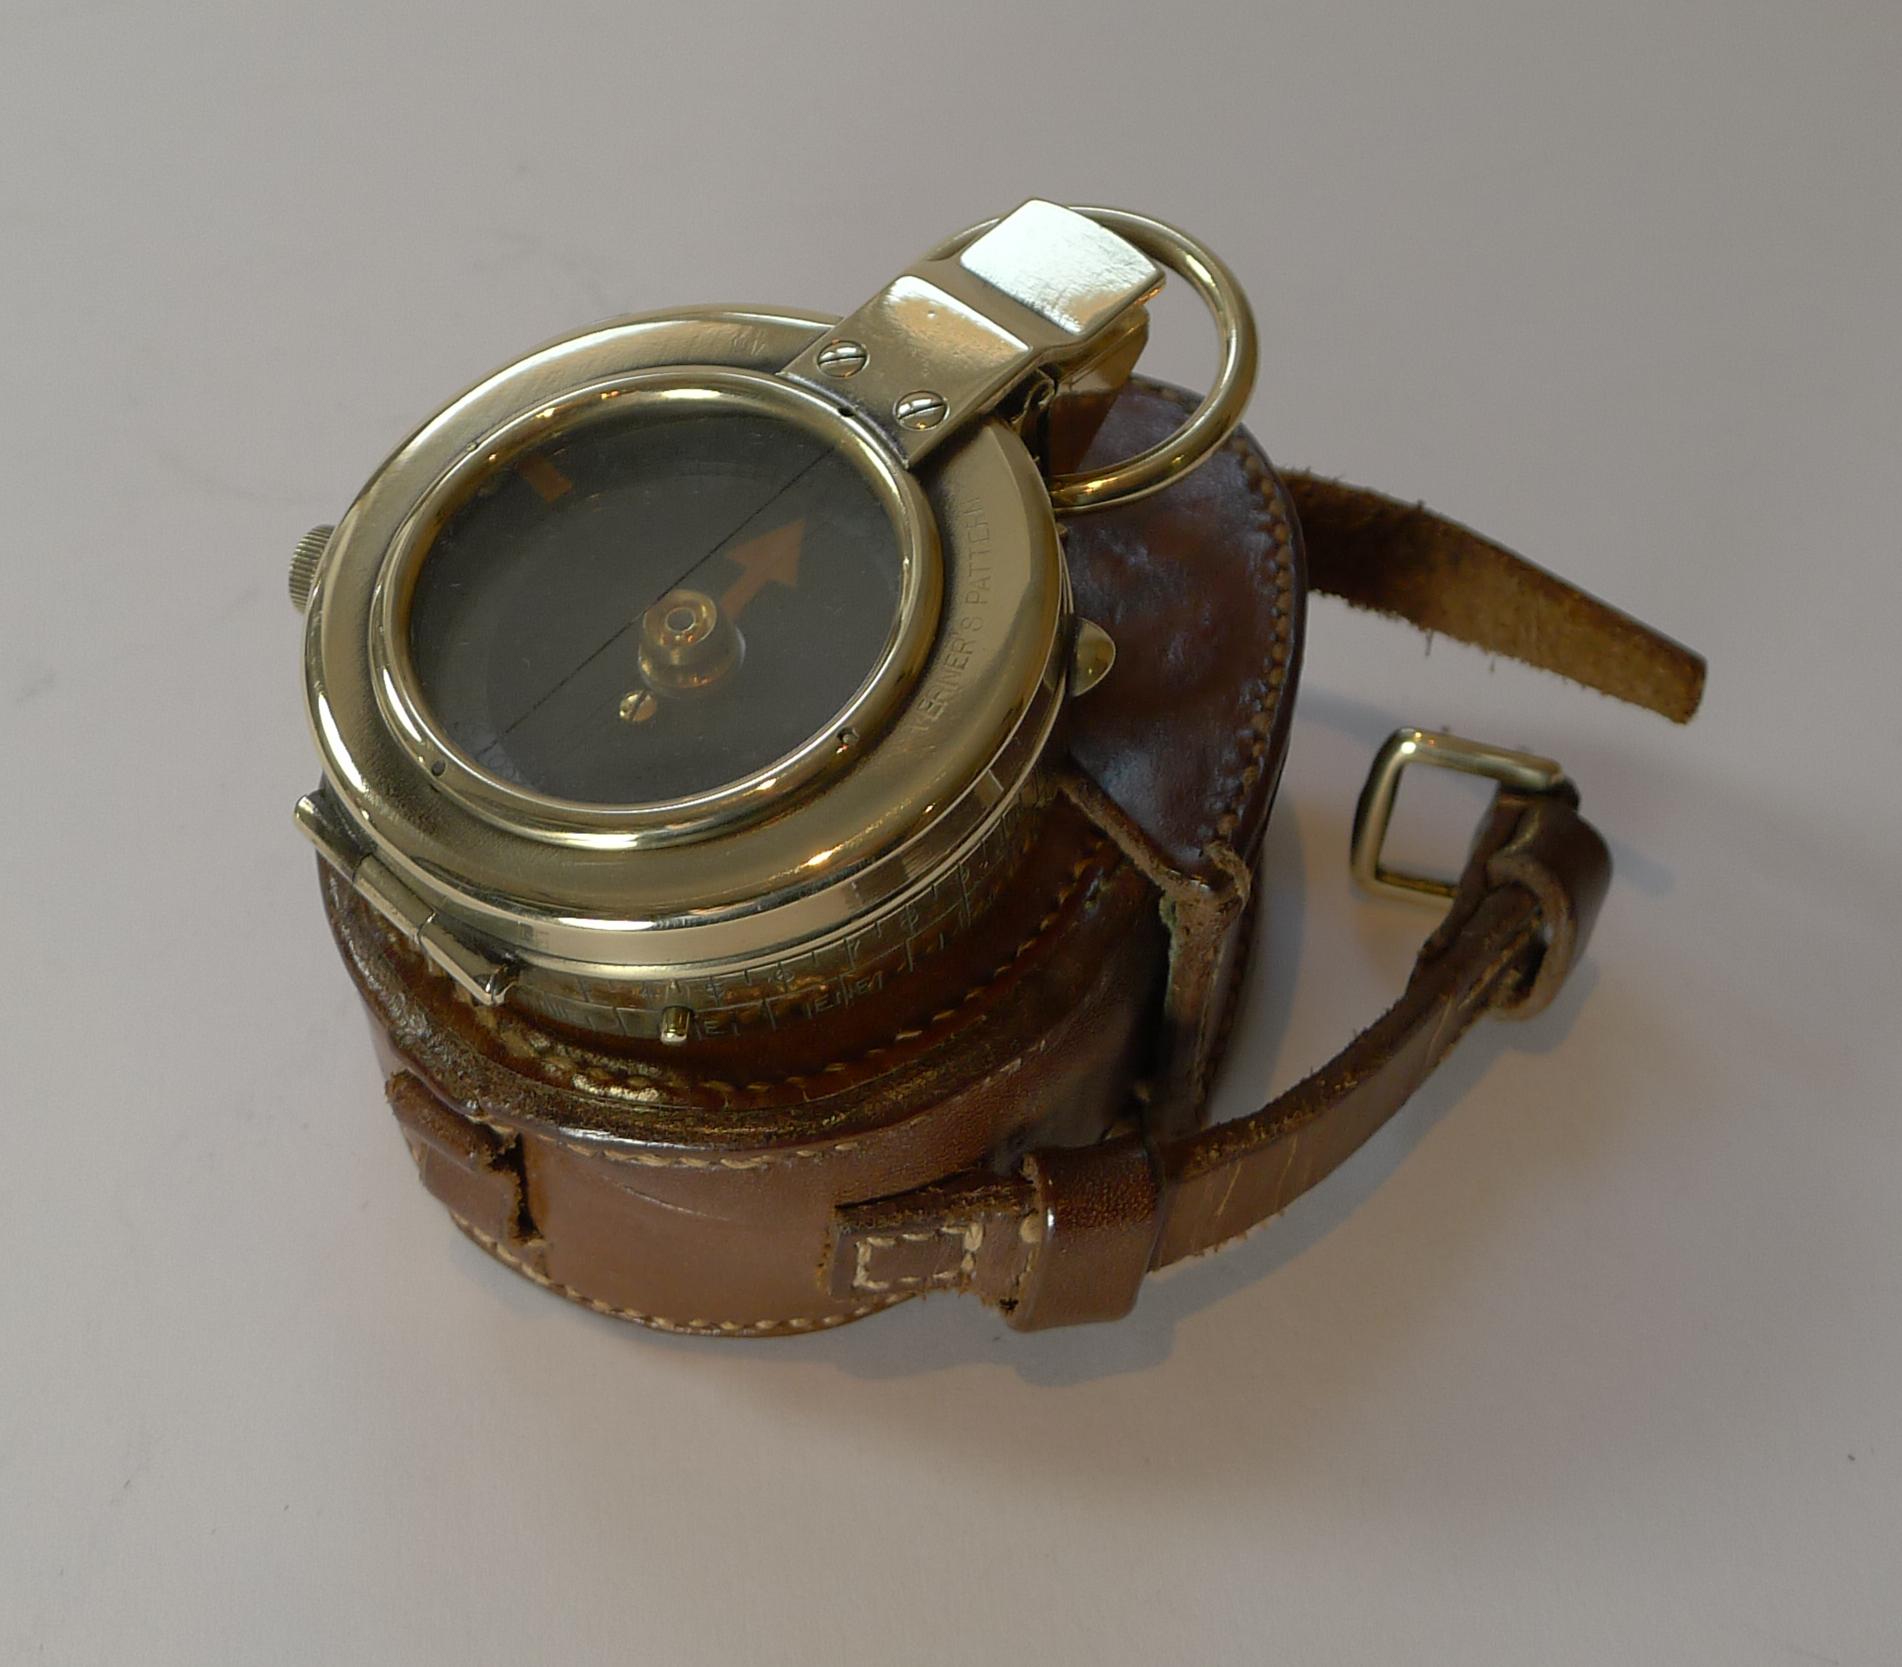 English WWI 1917 British Army Officer's Compass, Verner's Patent MK VIII by French Ltd